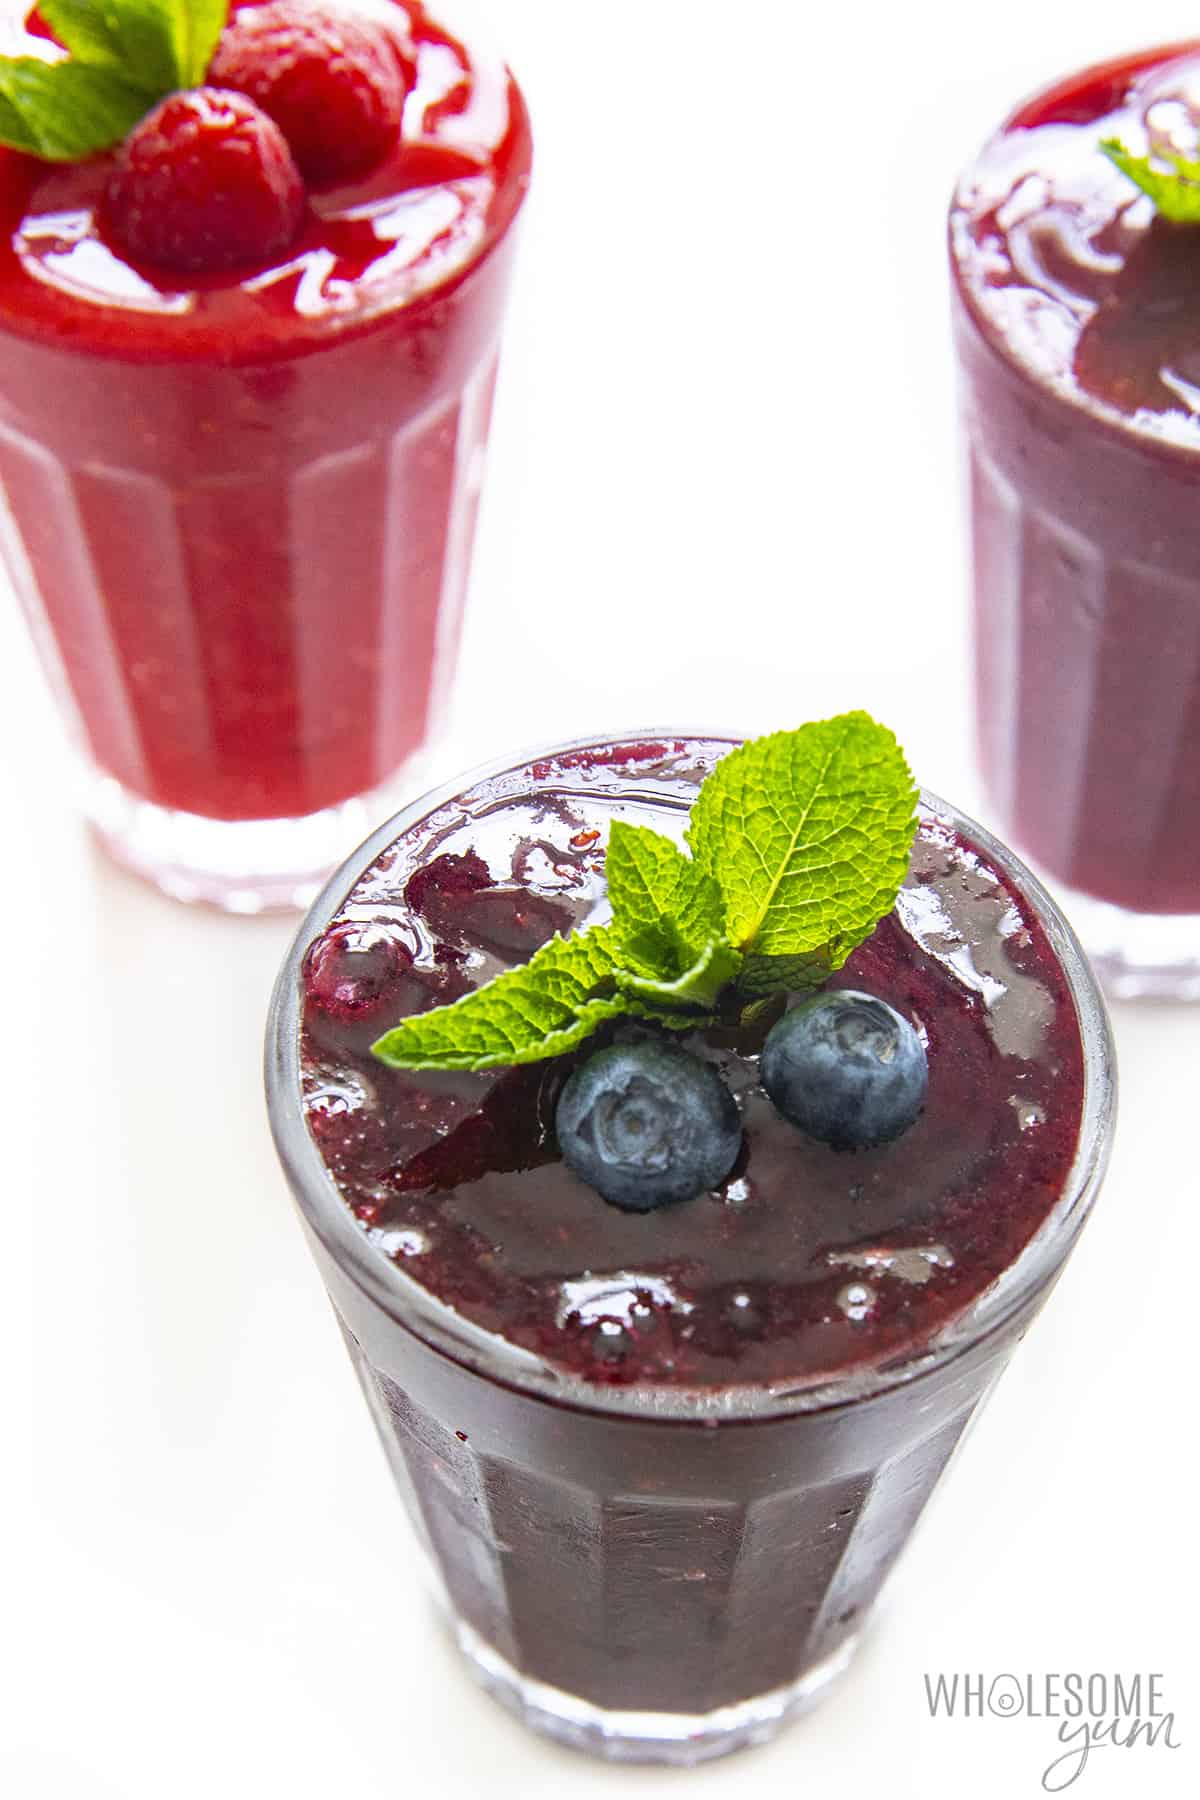 Sugar free slushie flavors in glasses with fresh berries on top.